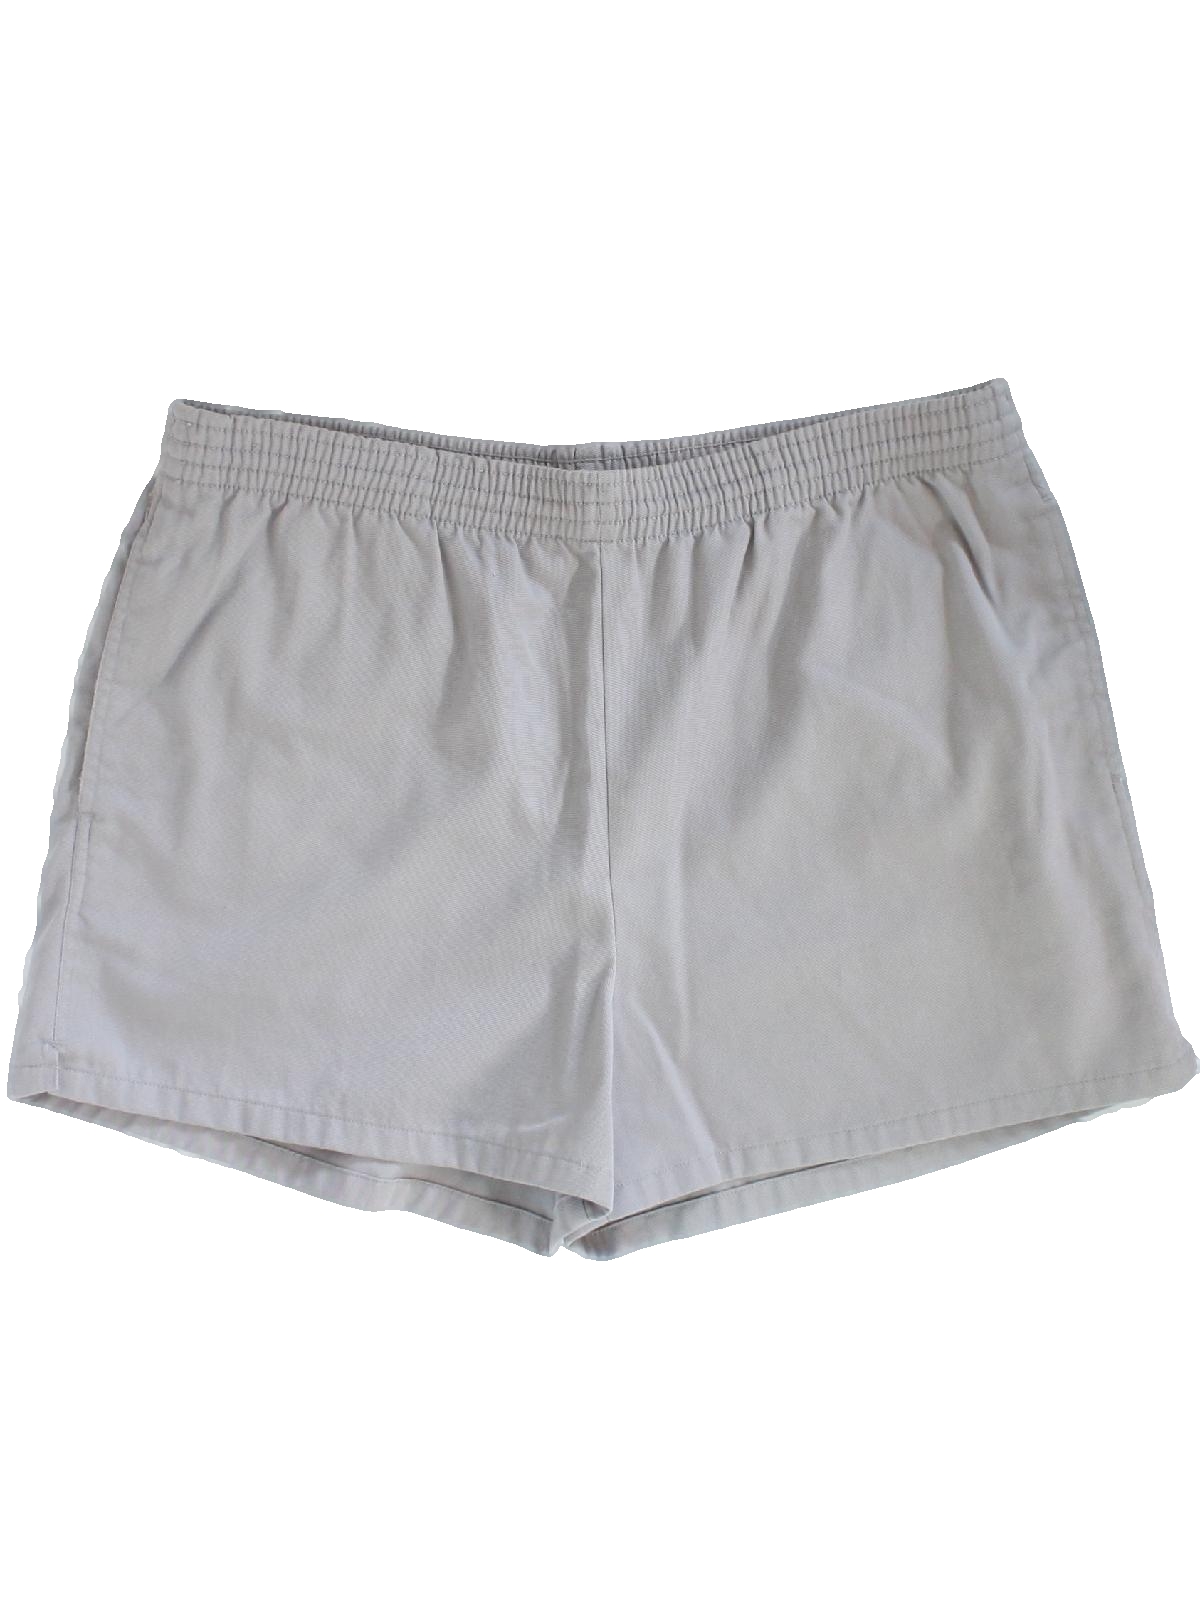 Retro 1980s Shorts: 80s -Repage- Mens light grey background polyester ...